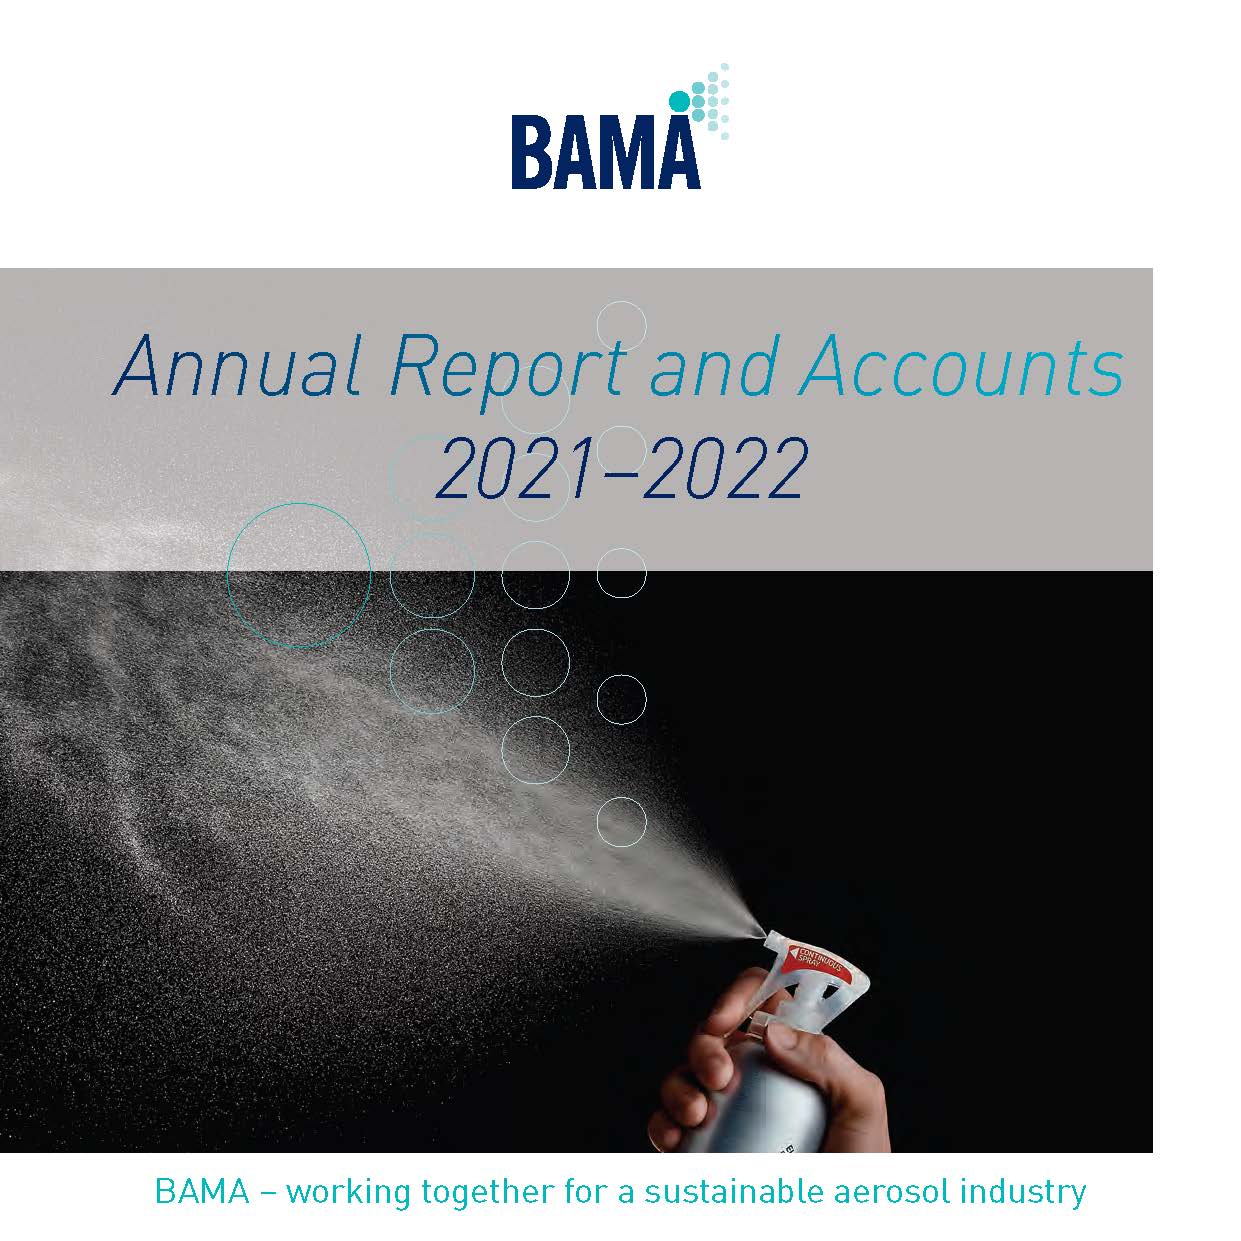 files/Library/Annual Reports/BAMA/AR 2021-2022.pdf